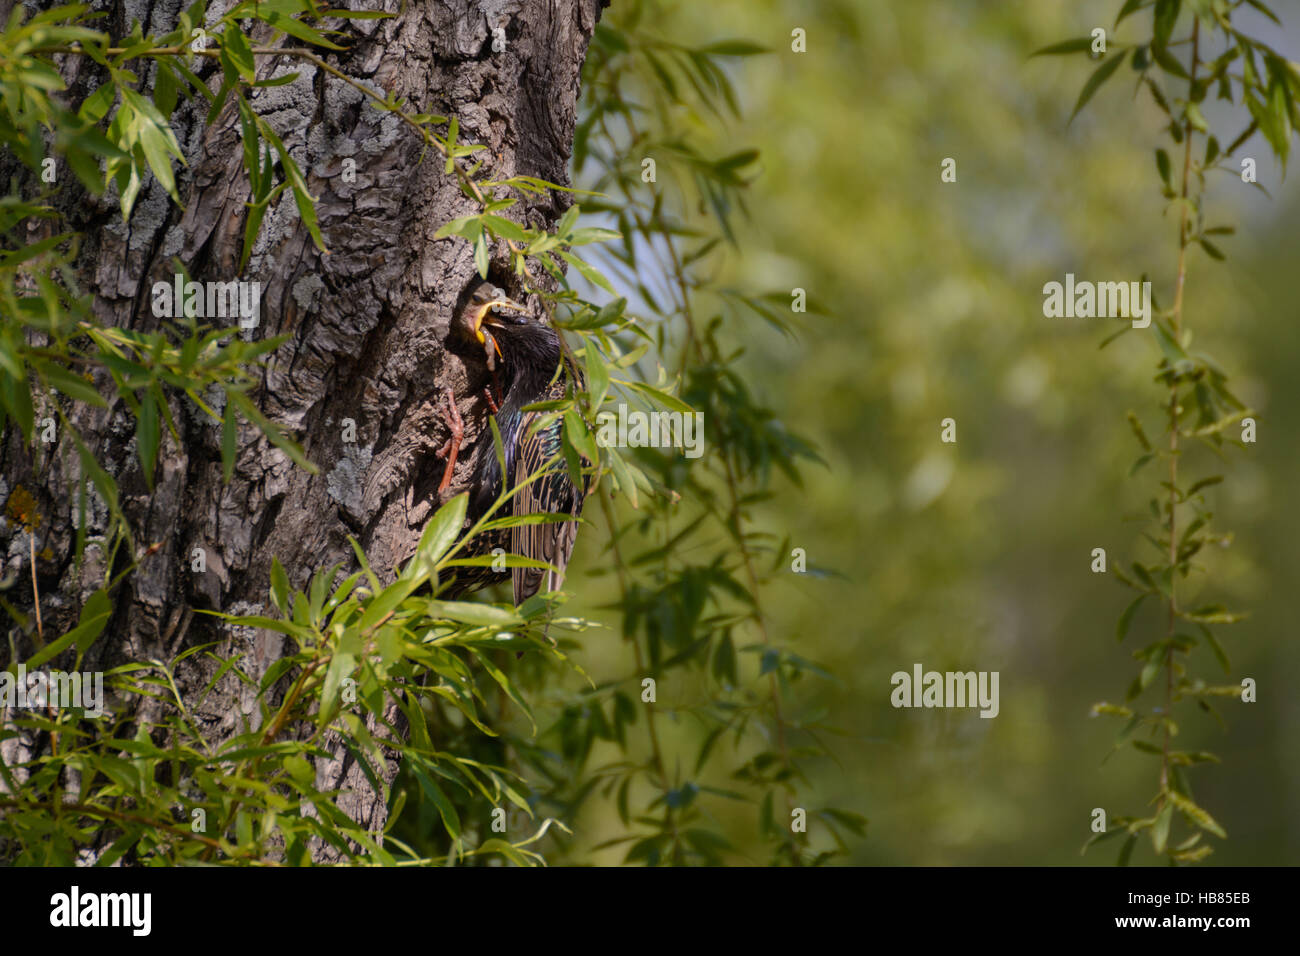 Star feeding young in nest with worm Stock Photo